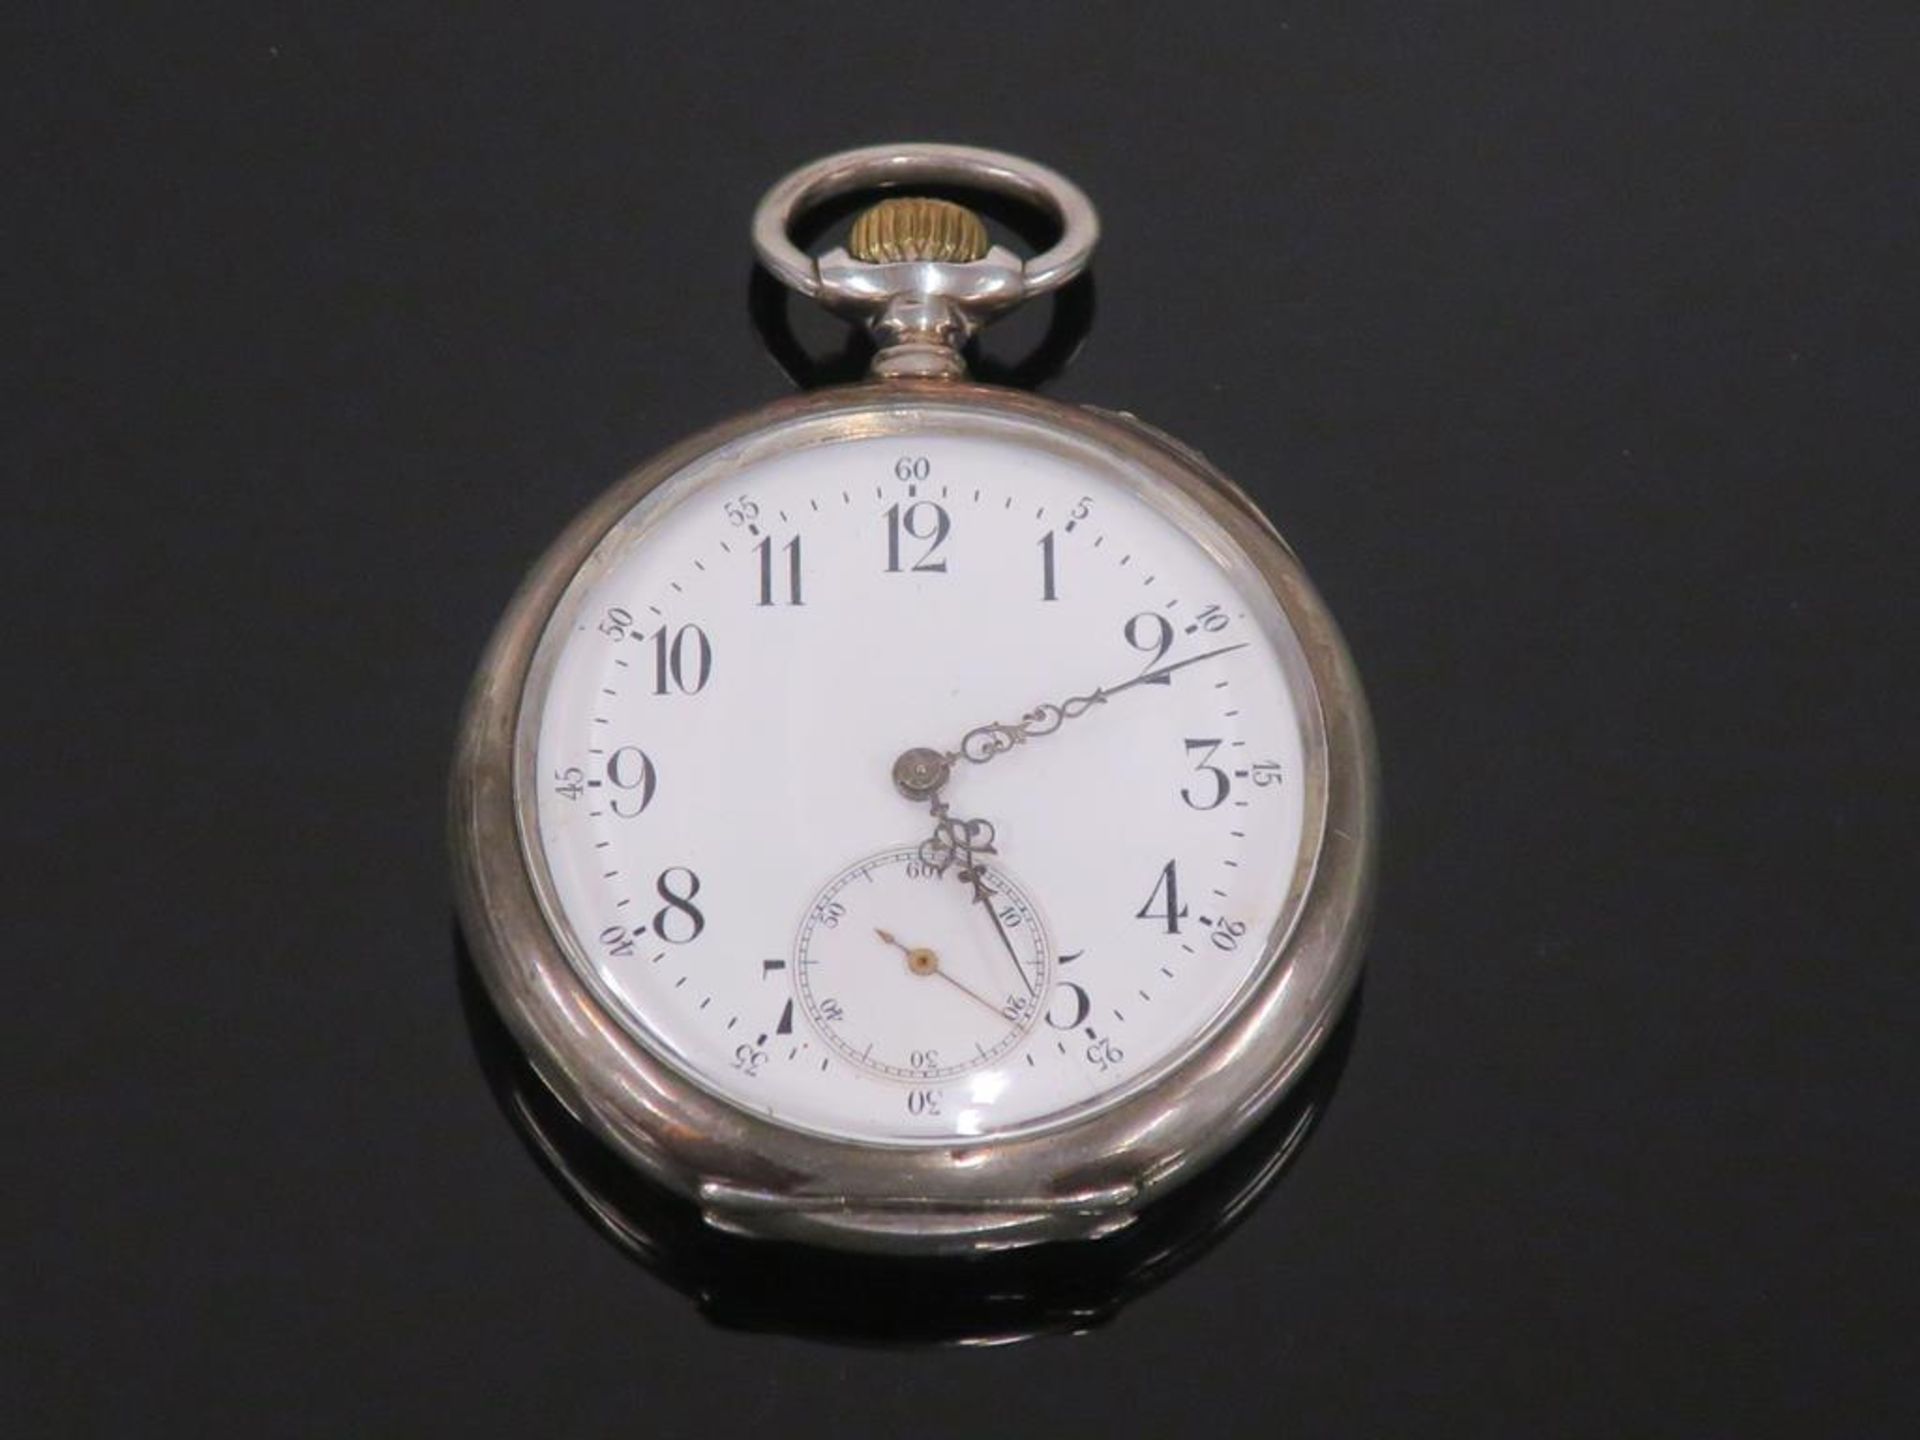 A Fine Silver Pocket Watch Hallmarked with 0.800, 1327426, a Grouse, a German Crescent Moon and